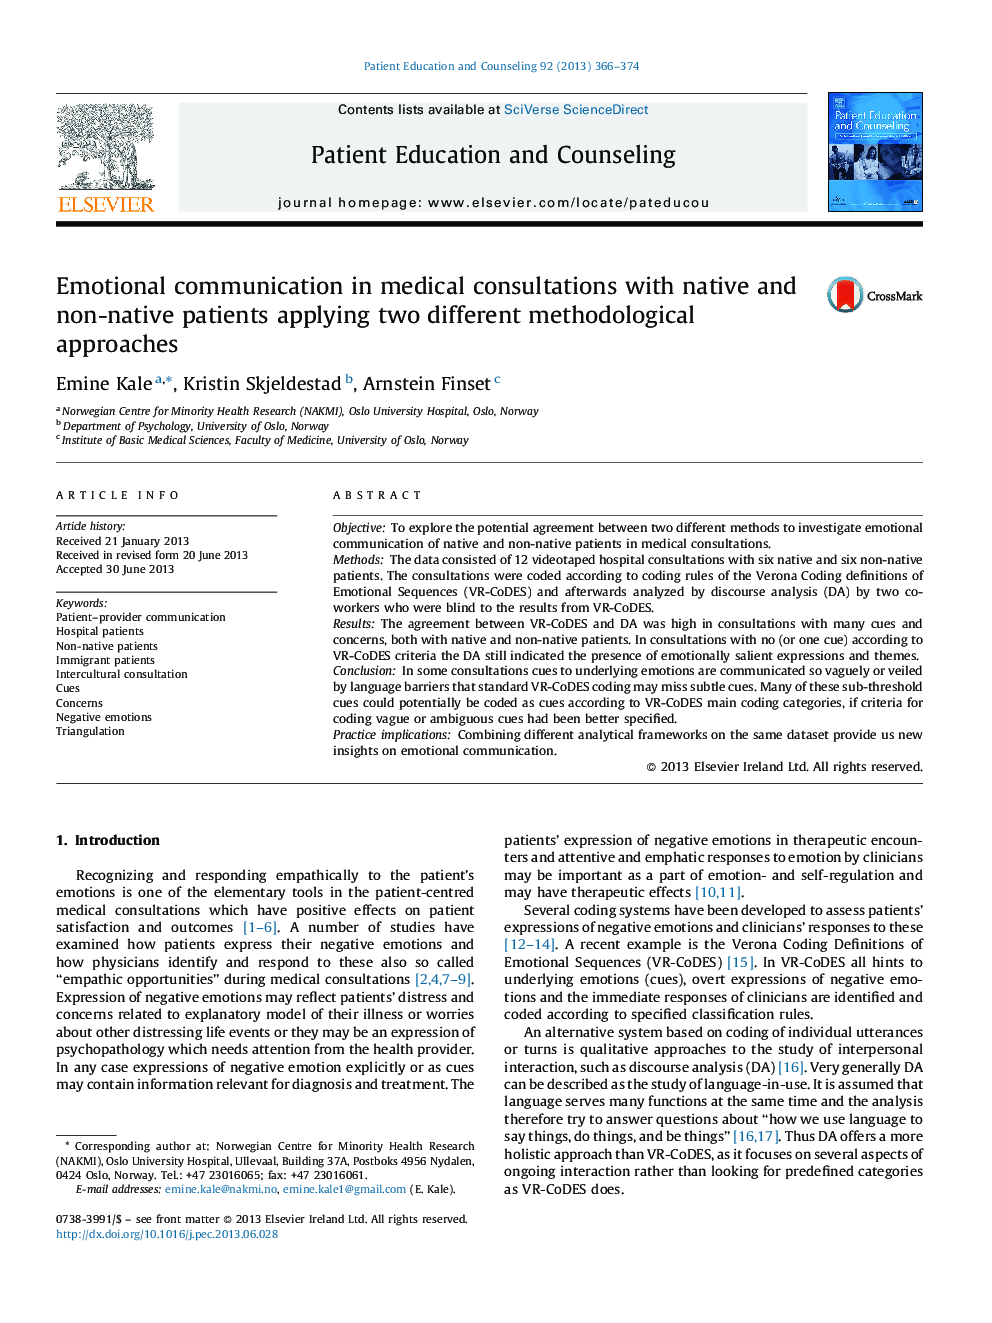 Emotional communication in medical consultations with native and non-native patients applying two different methodological approaches